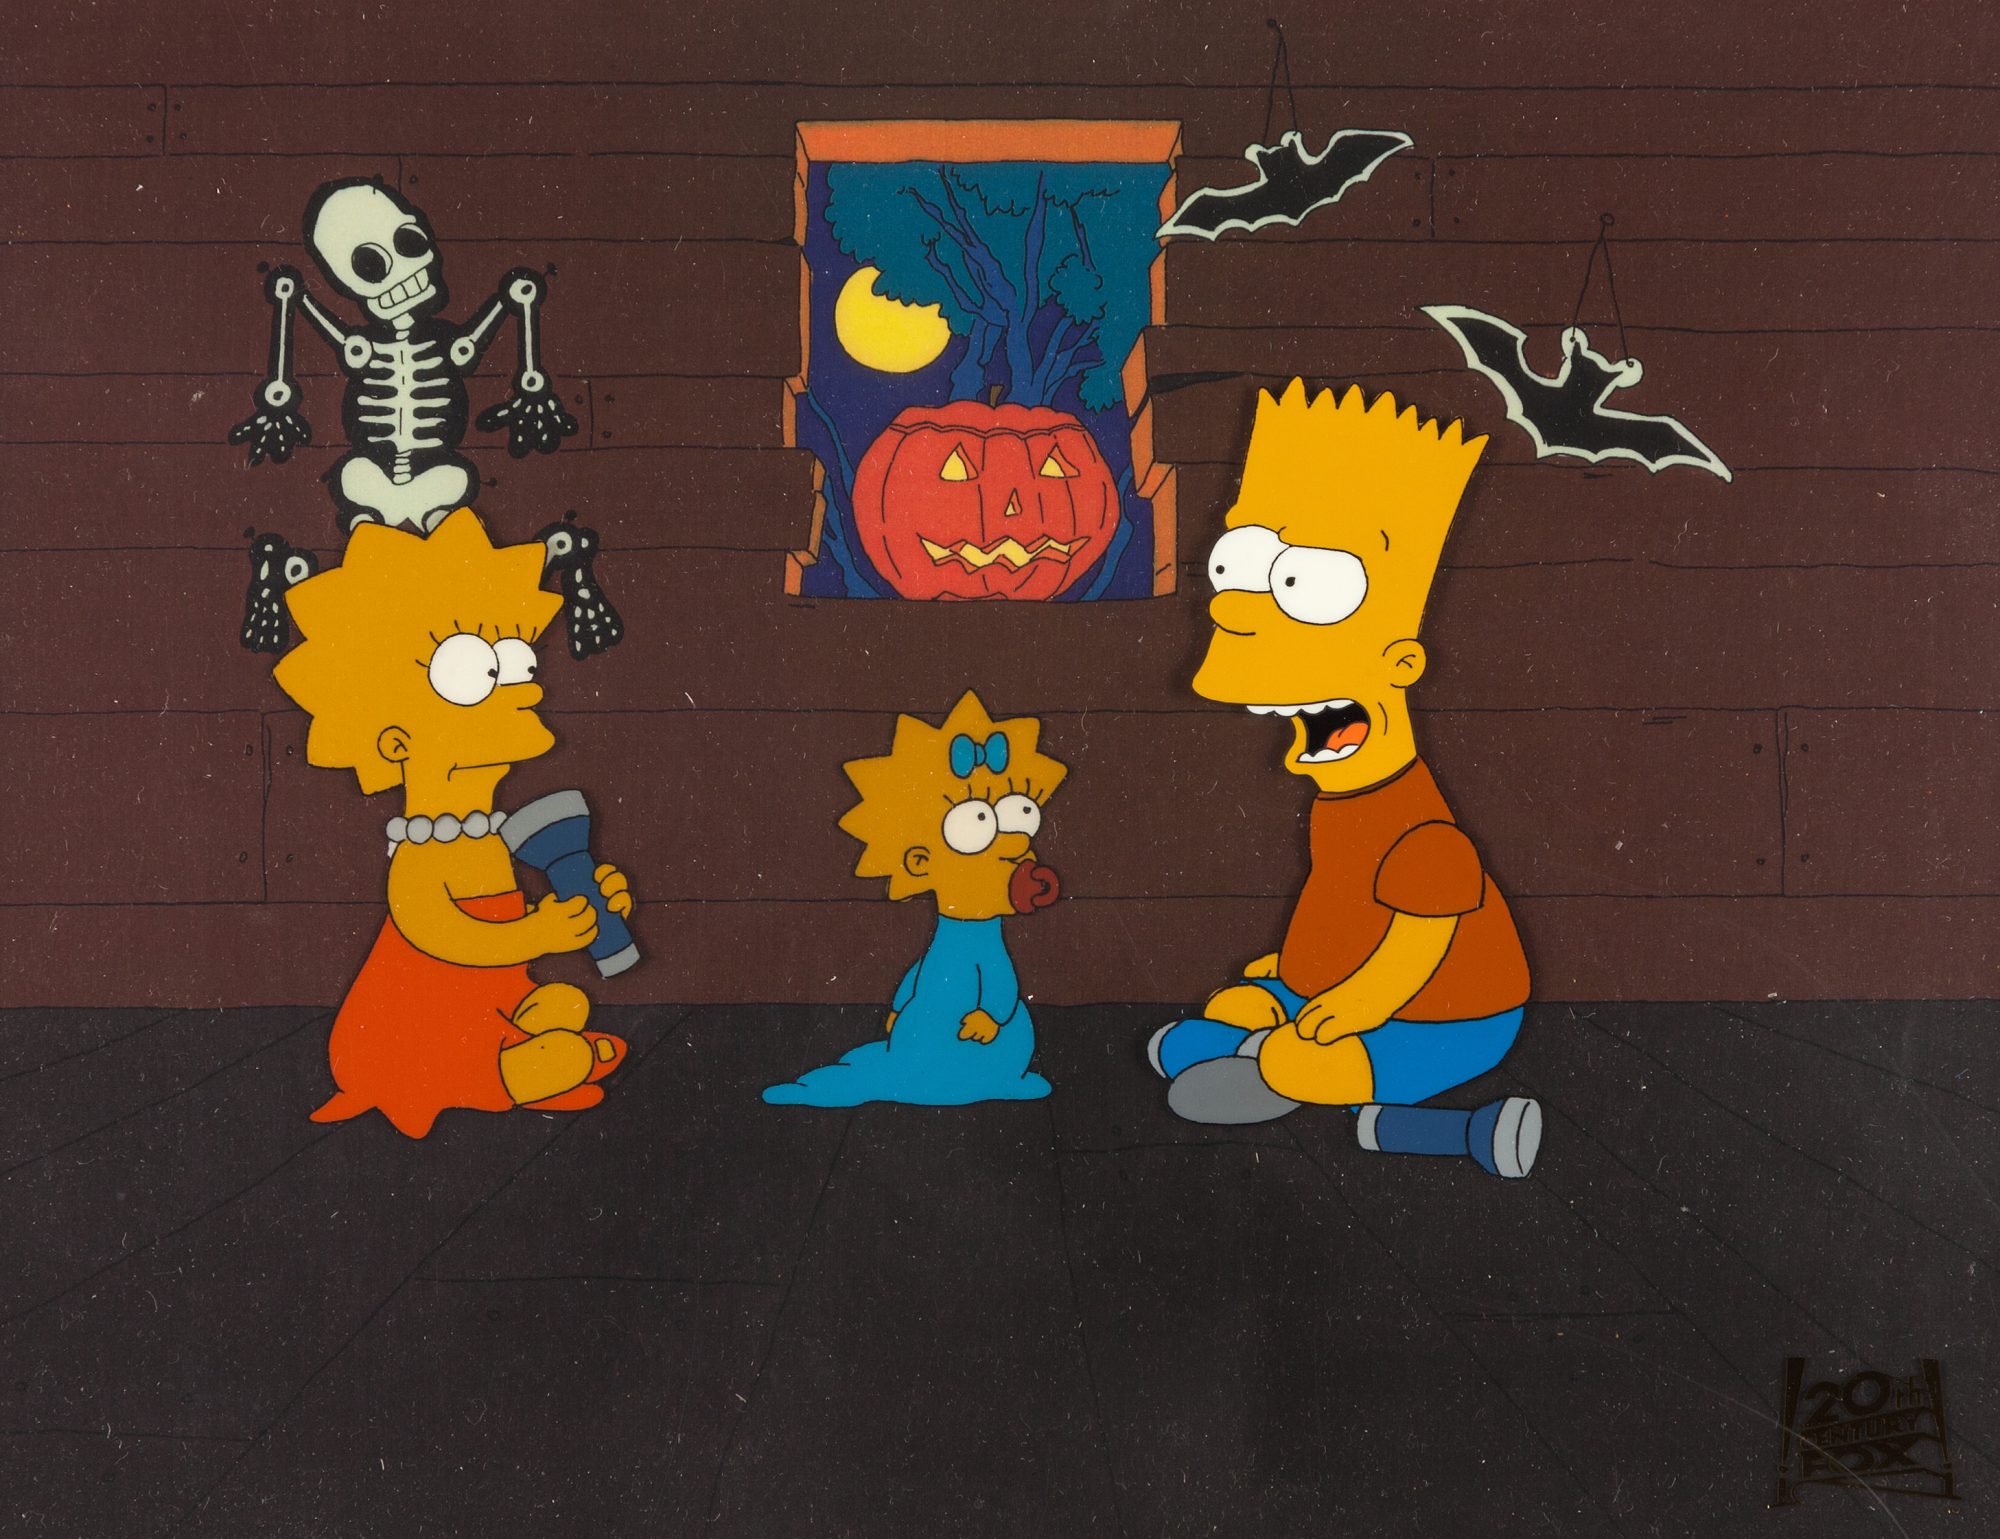 The Simpsons Treehouse of Horror production cel